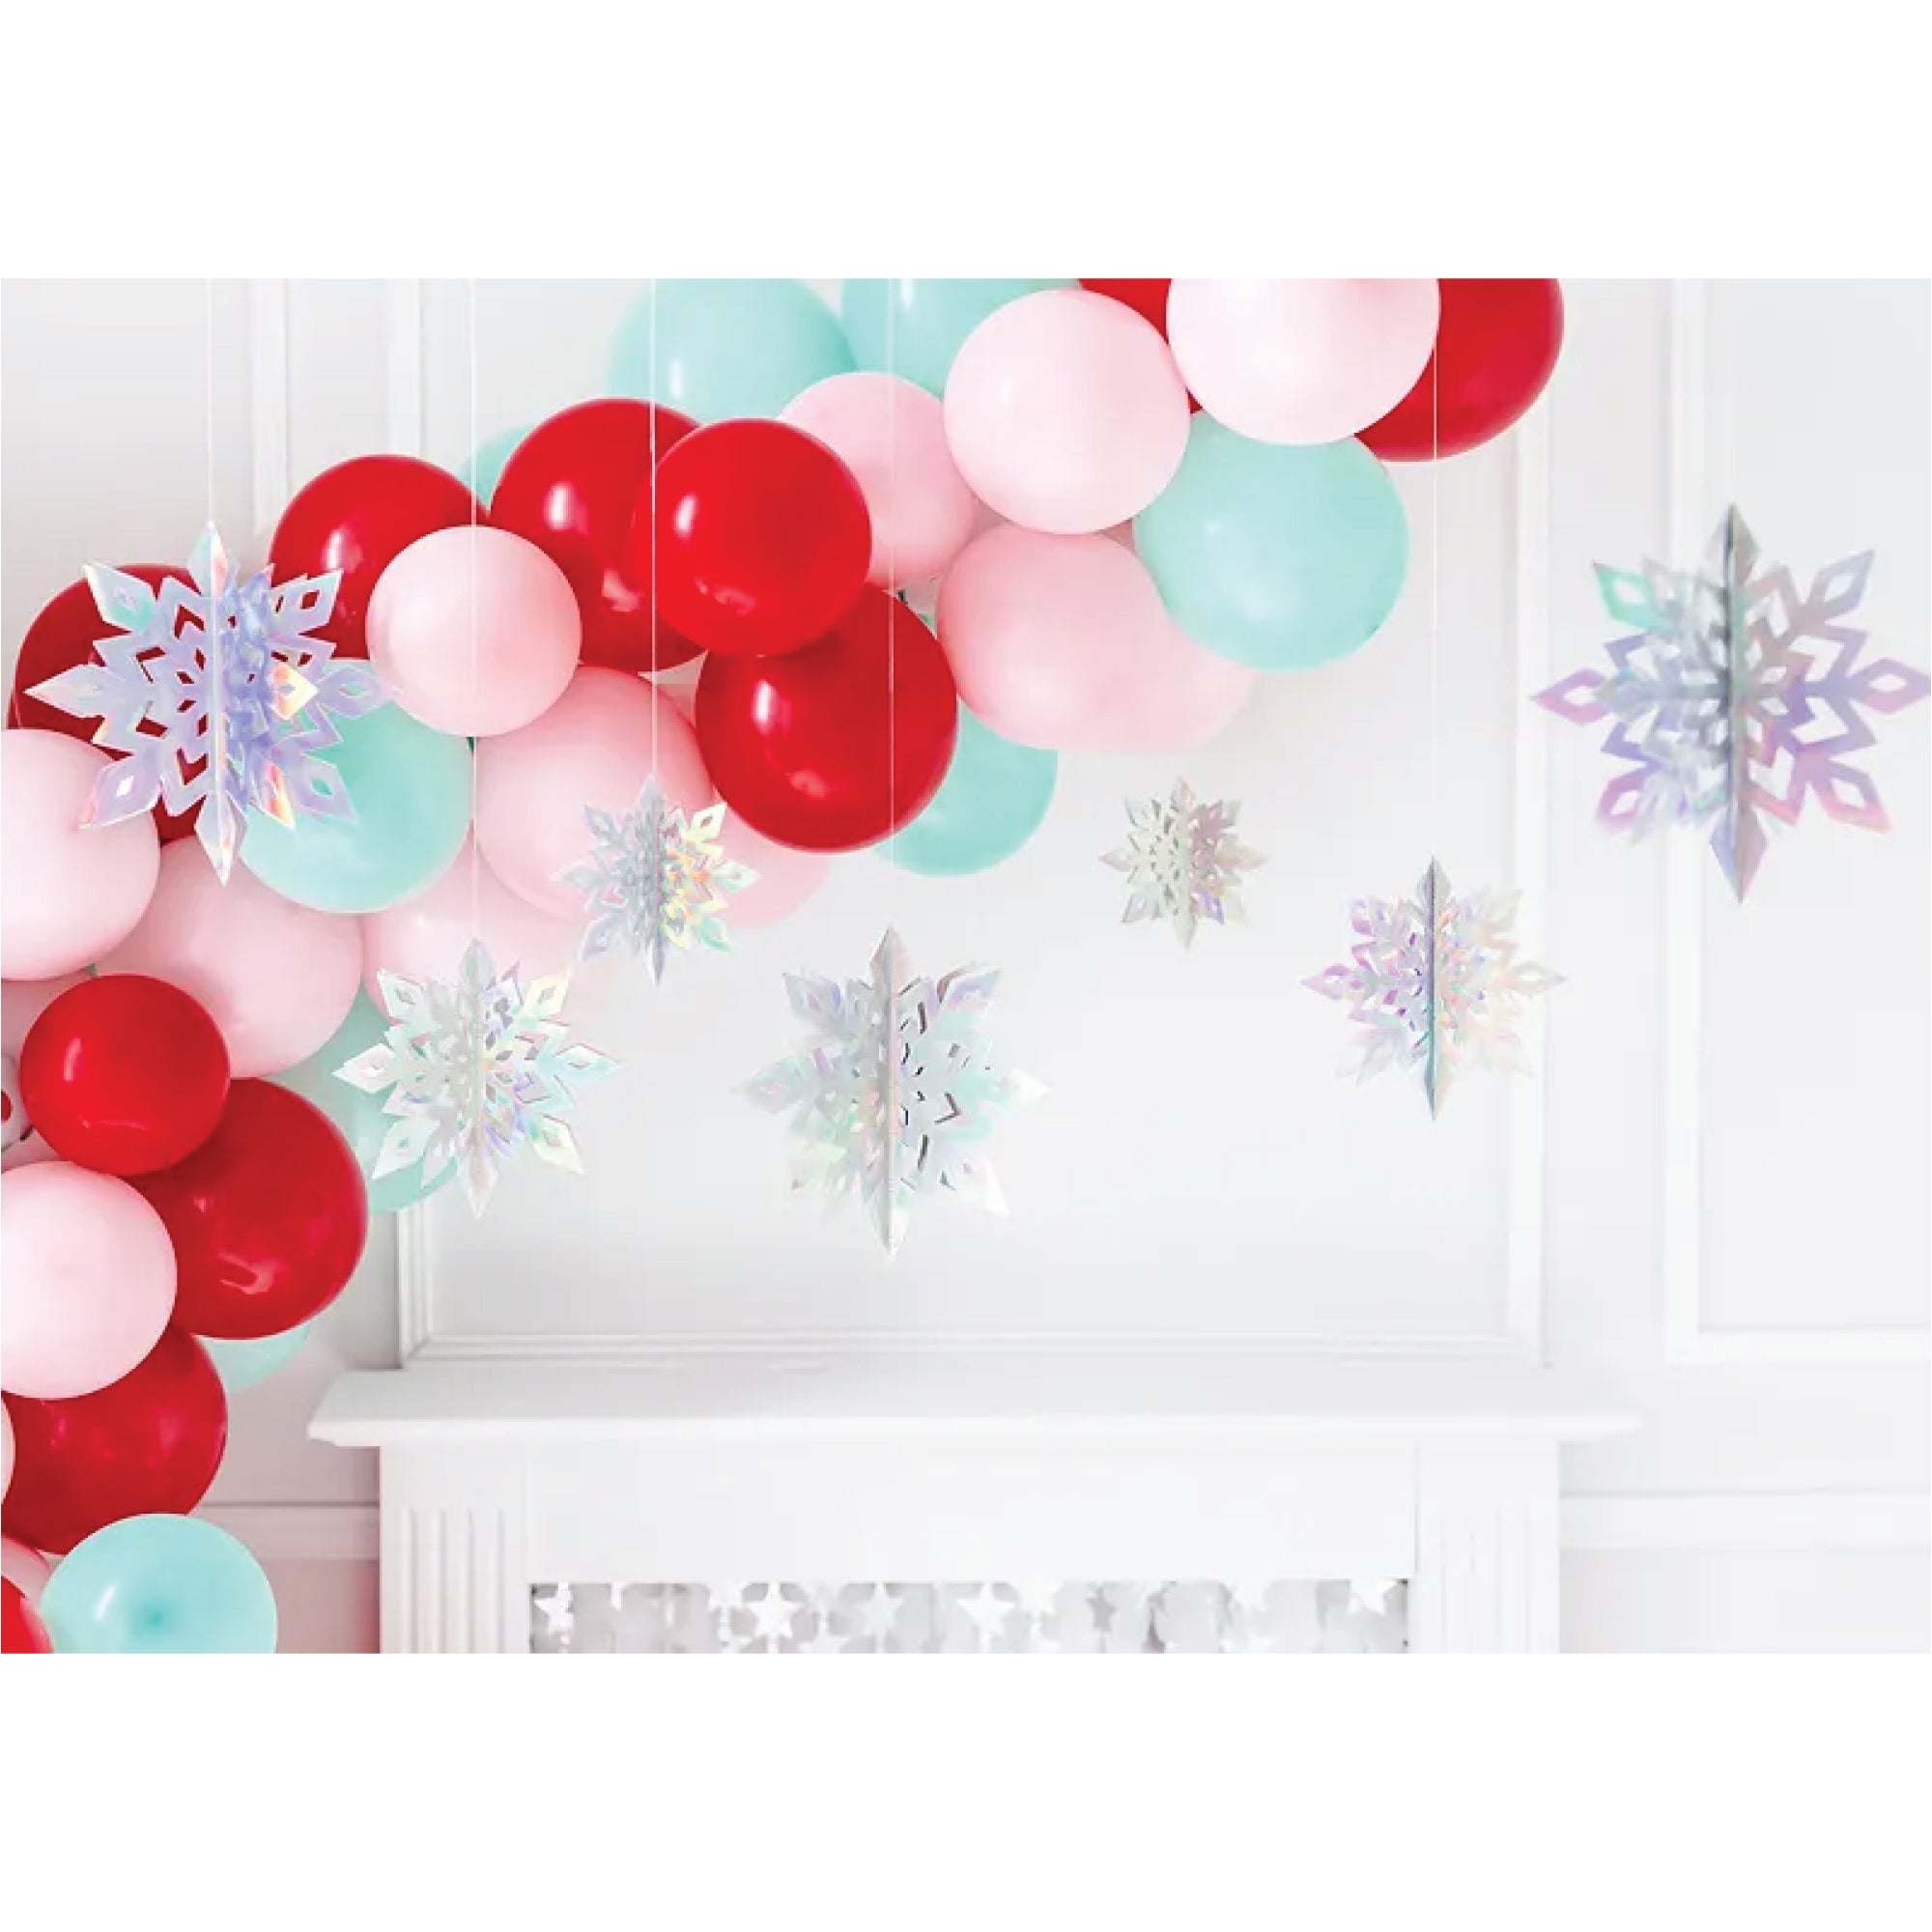 Iridescent Snowflake Hanging Decorations 6ct | The Party Darling